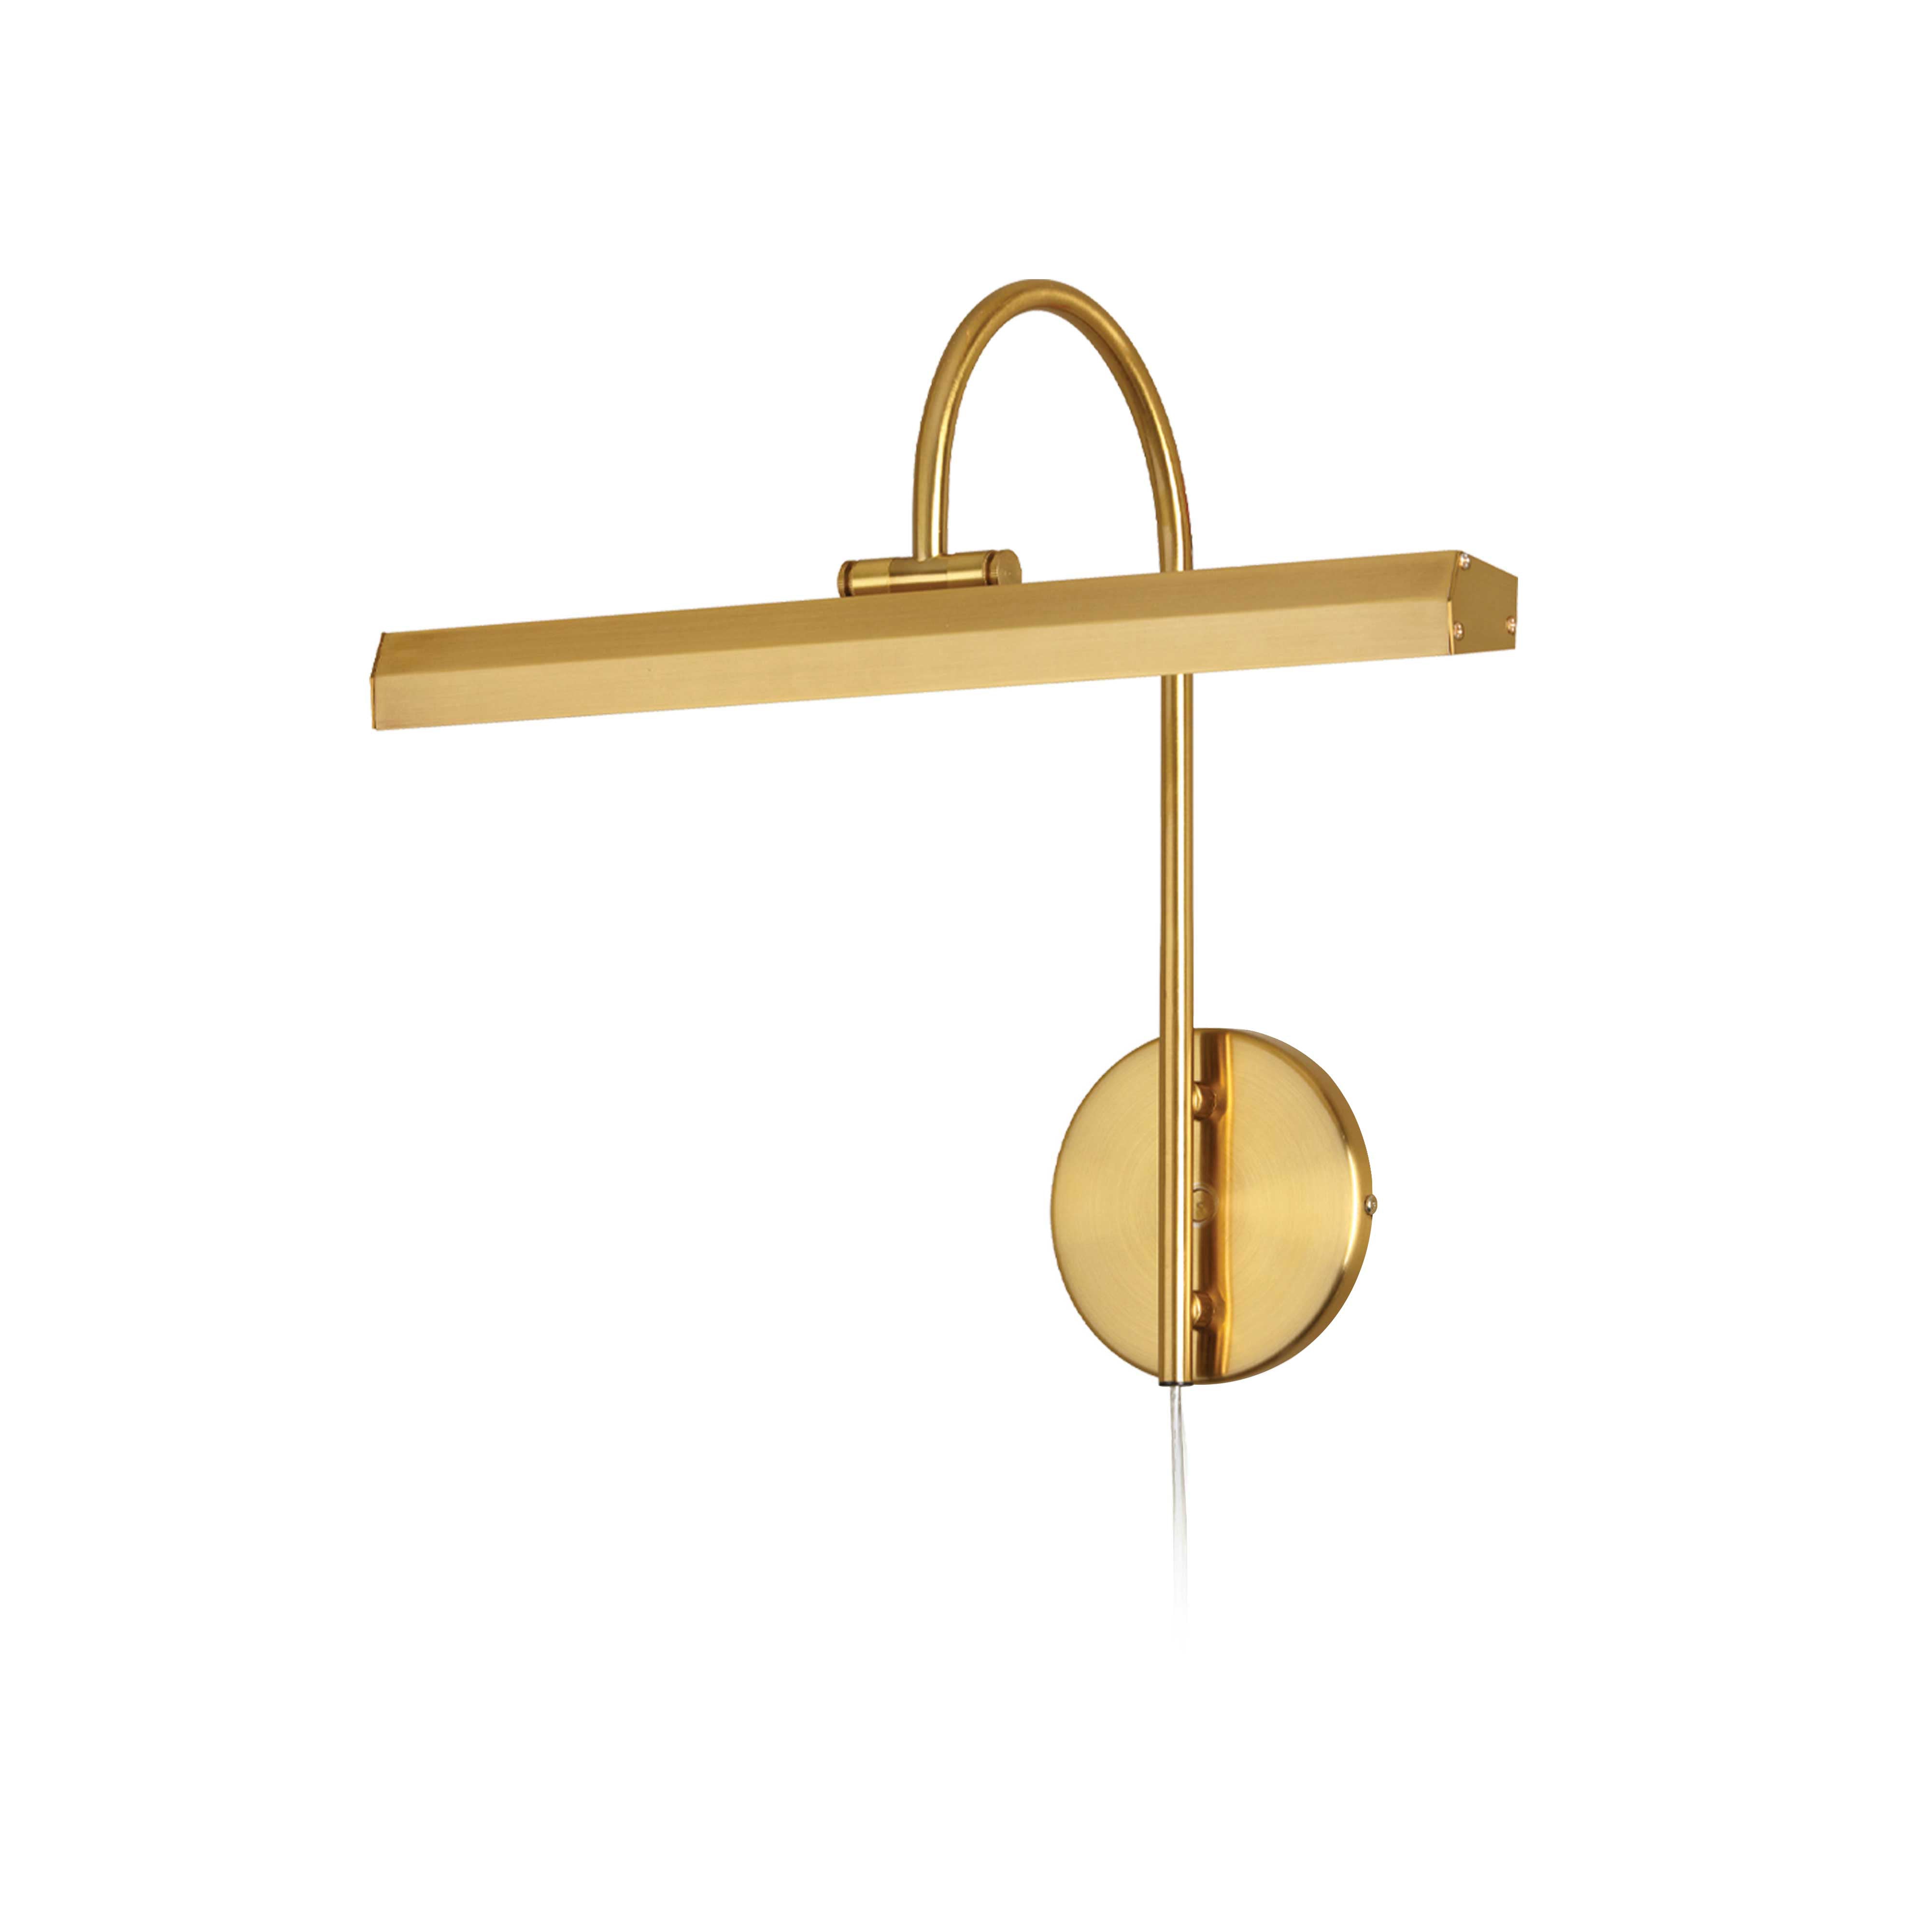 DISPLAY/EXHIBIT Wall sconce à tableau Gold INTEGRATED LED - PIC120-16LED-AGB | DAINOLITE